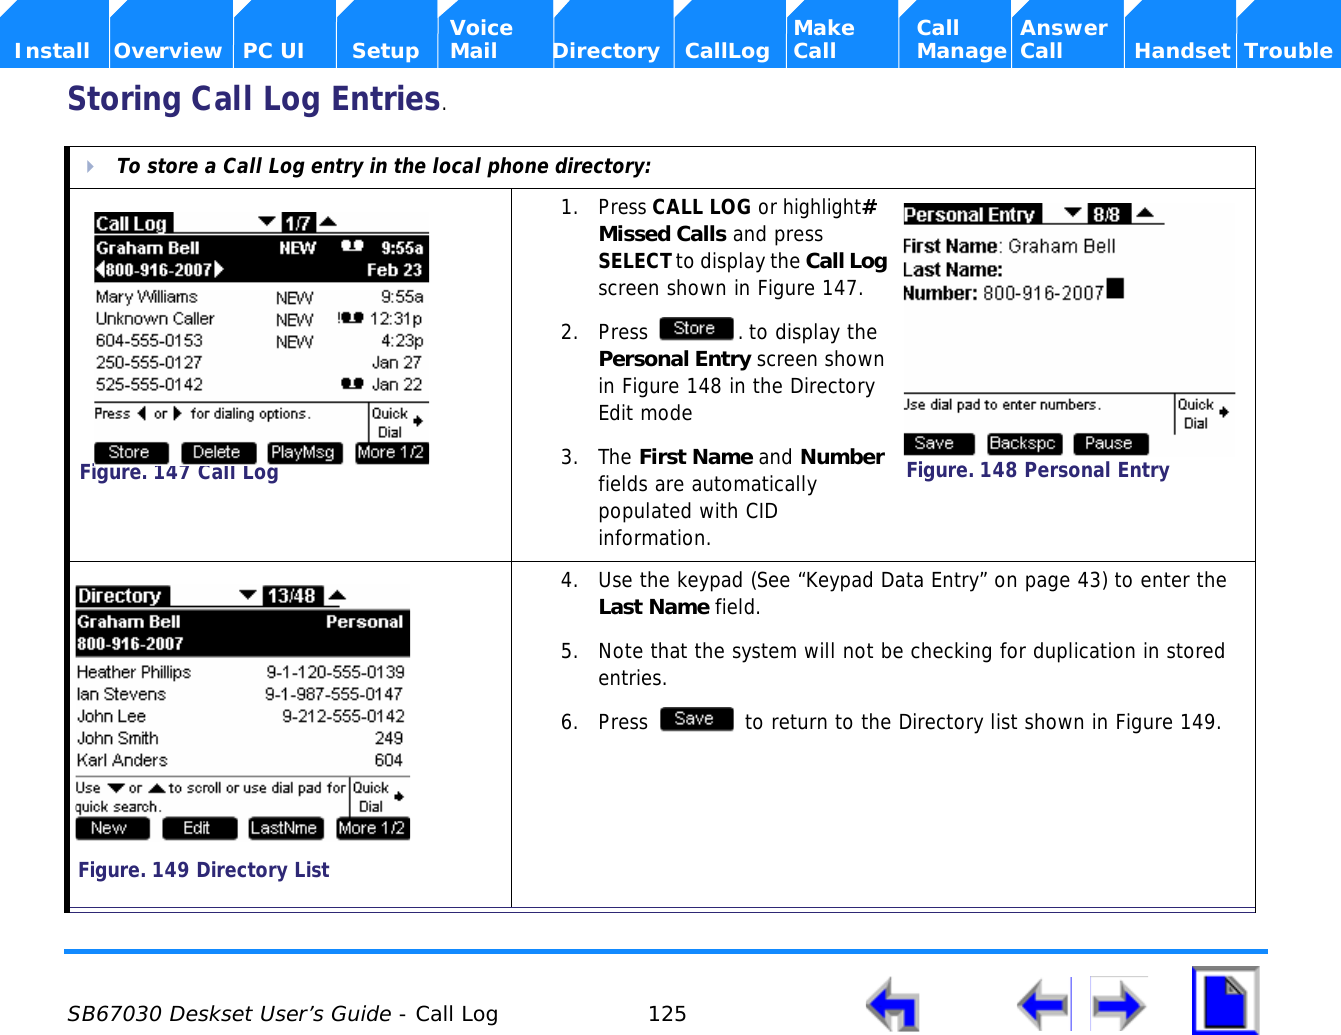  SB67030 Deskset User’s Guide - Call Log 125    Voice Make Call Answer  Install Overview PC UI Setup Mail Directory CallLog Call Manage Call Handset TroubleStoring Call Log Entries.To store a Call Log entry in the local phone directory:1. Press CALL LOG or highlight# Missed Calls and press SELECT to display the Call Log screen shown in Figure 147.2. Press  . to display the Personal Entry screen shown in Figure 148 in the Directory Edit mode3. The First Name and Number fields are automatically populated with CID information.4. Use the keypad (See “Keypad Data Entry” on page 43) to enter the Last Name field. 5. Note that the system will not be checking for duplication in stored entries. 6. Press   to return to the Directory list shown in Figure 149.Figure. 147 Call LogFigure. 148 Personal EntryFigure. 149 Directory List